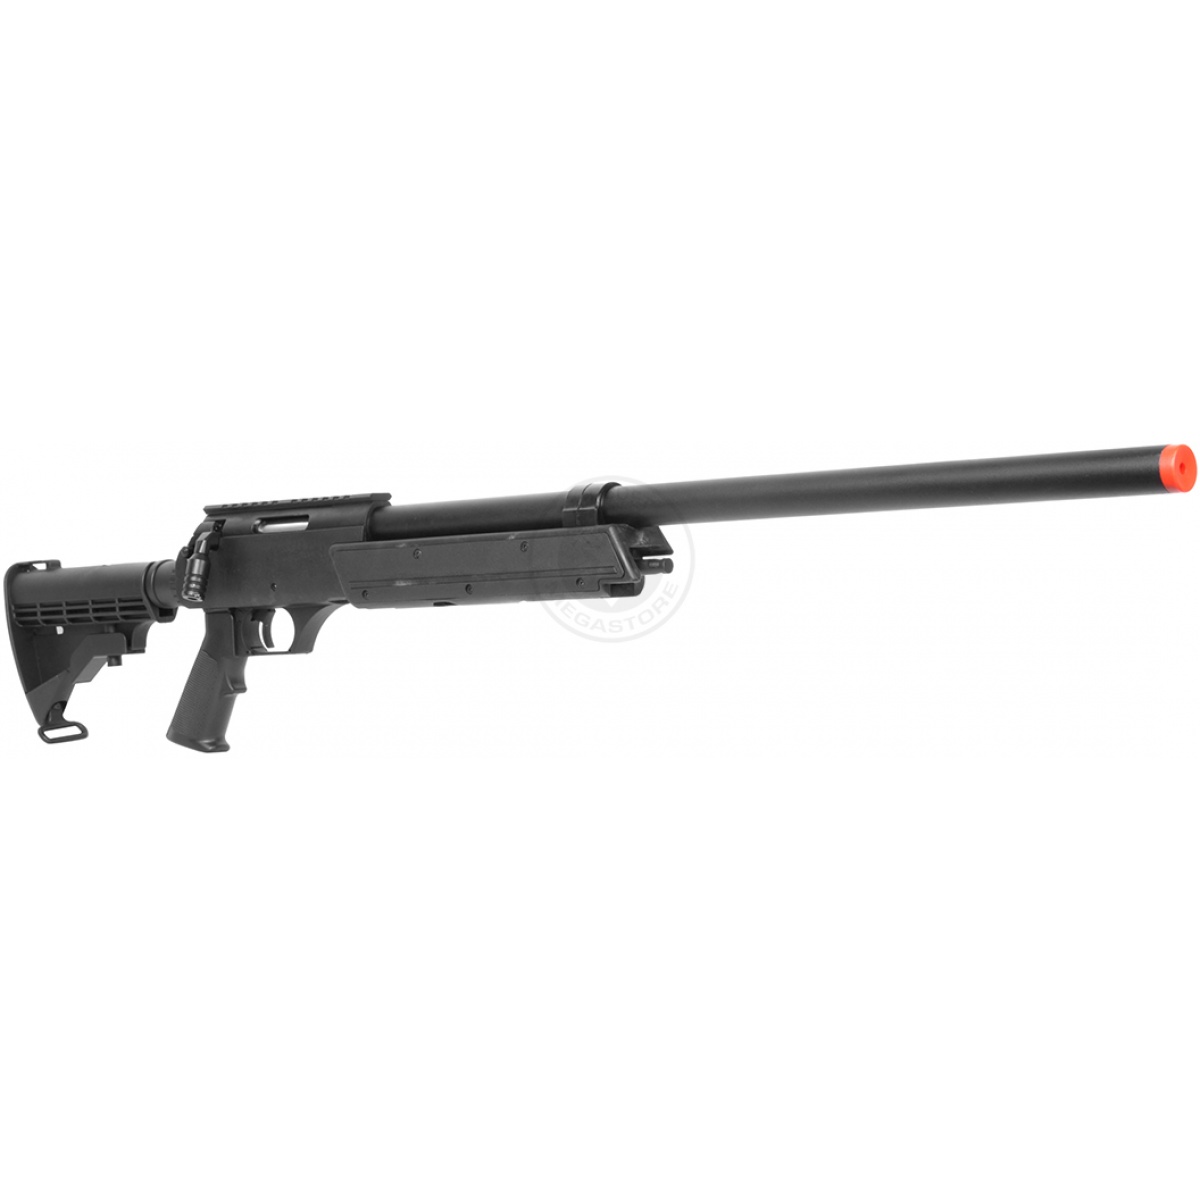 Mb06 SR 2 Tactical Airsoft Sniper Rifle W 3 9x32 Scope & Bipod Black 1 Scale for sale online 